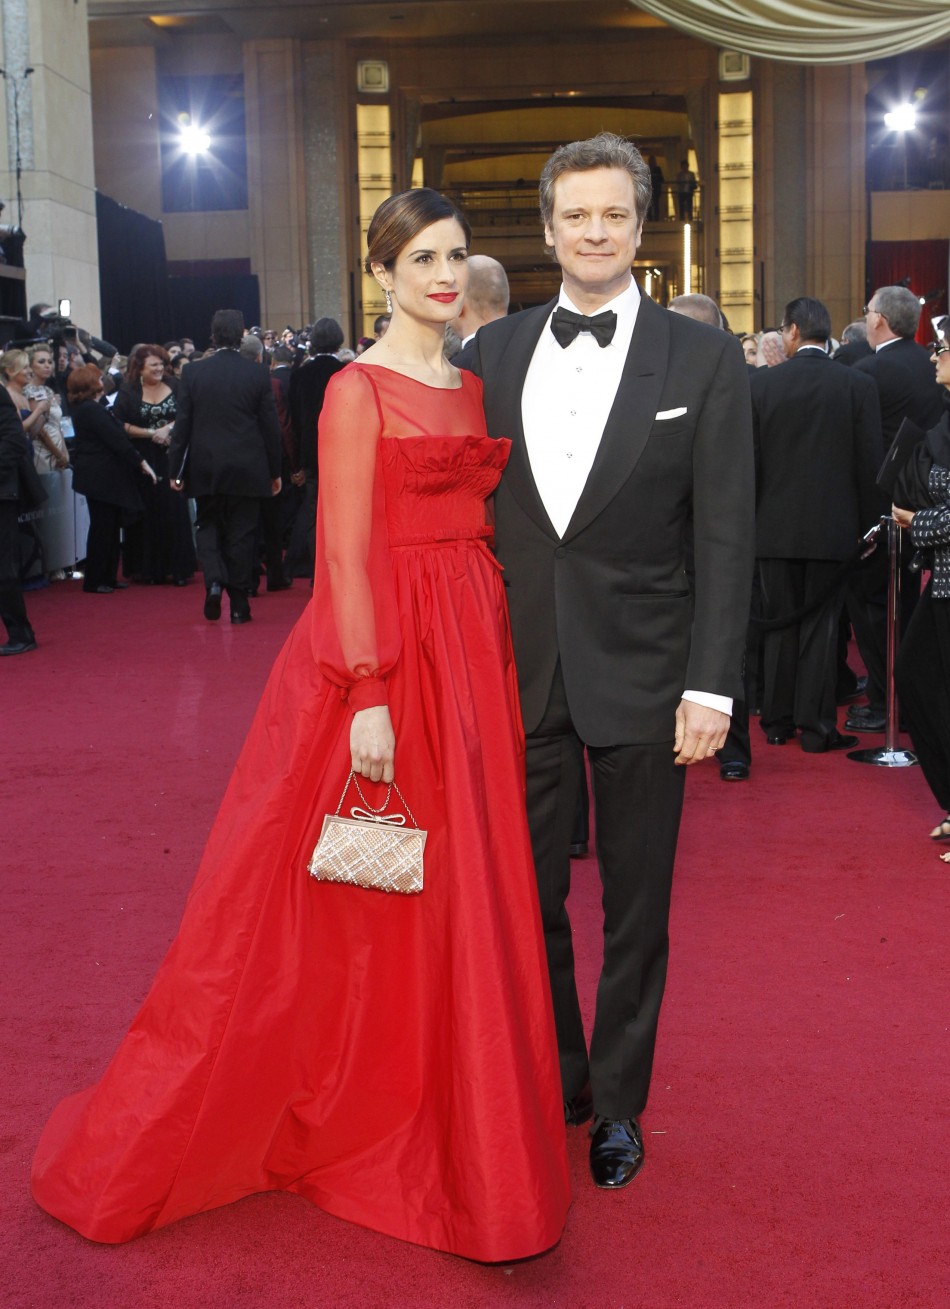 Firth and his wife Livia Giuggioli pose at the 84th Academy Awards in Hollywood